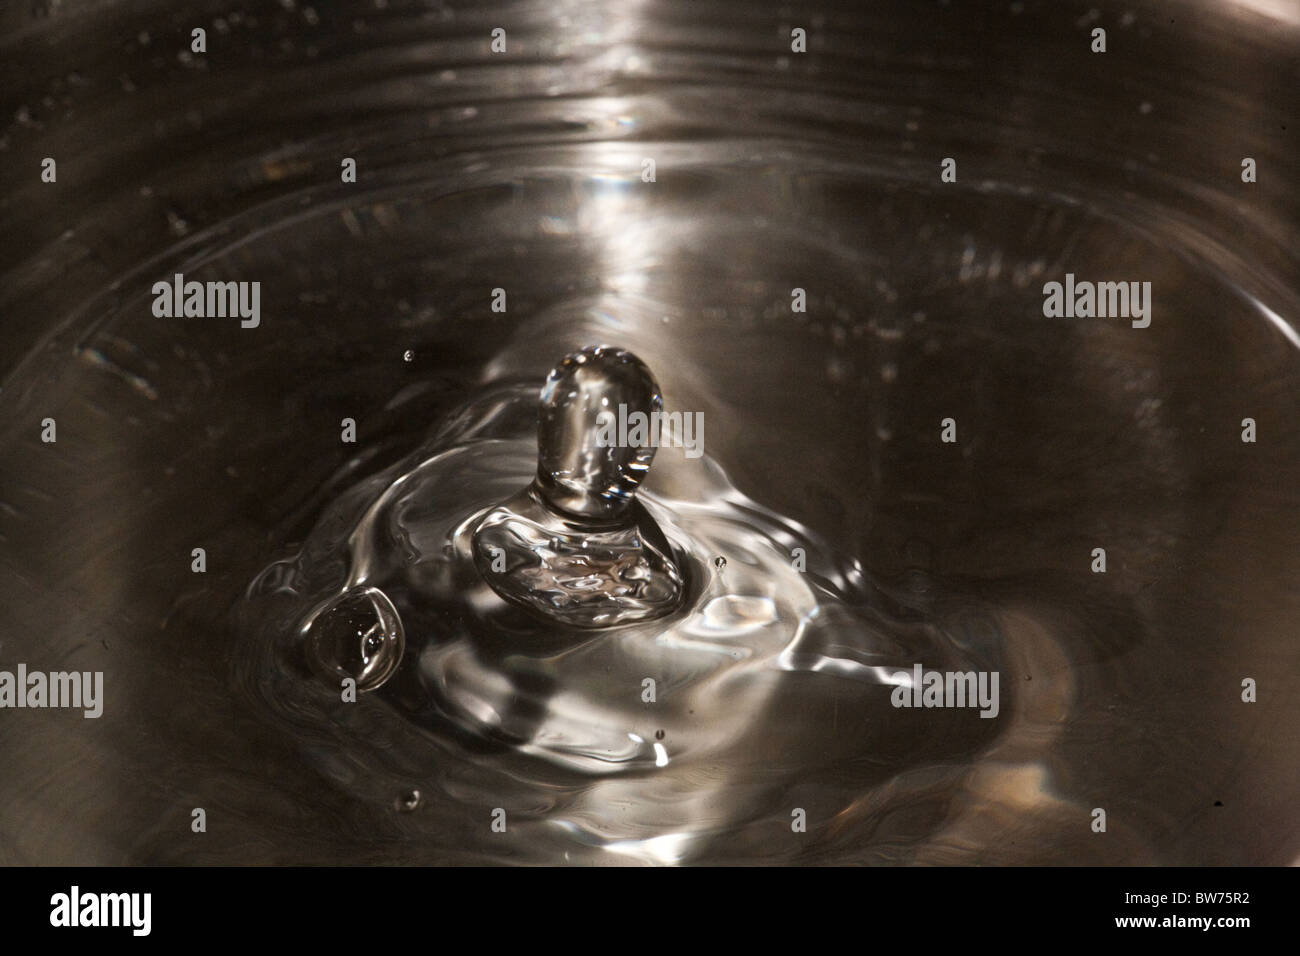 Droplets hitting water surface. Stock Photo